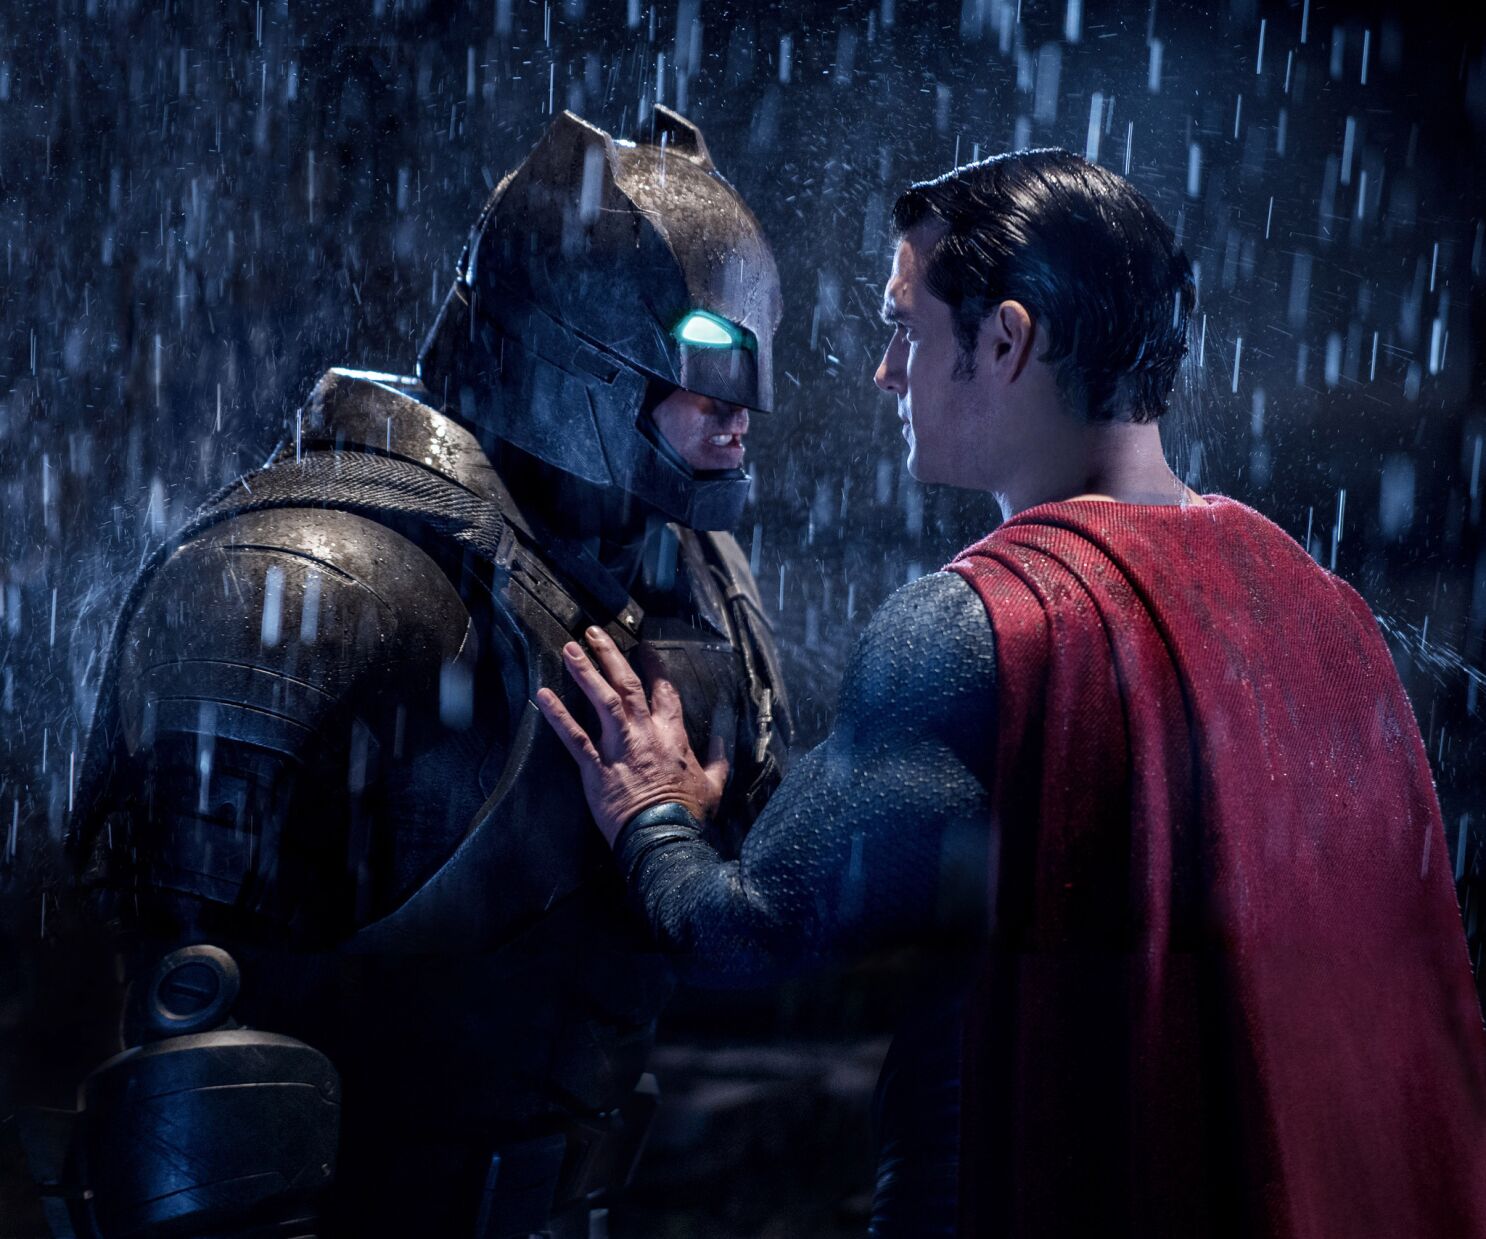 Review: 'Batman v Superman: Dawn of Justice' is a gritty superhero showdown  - Los Angeles Times